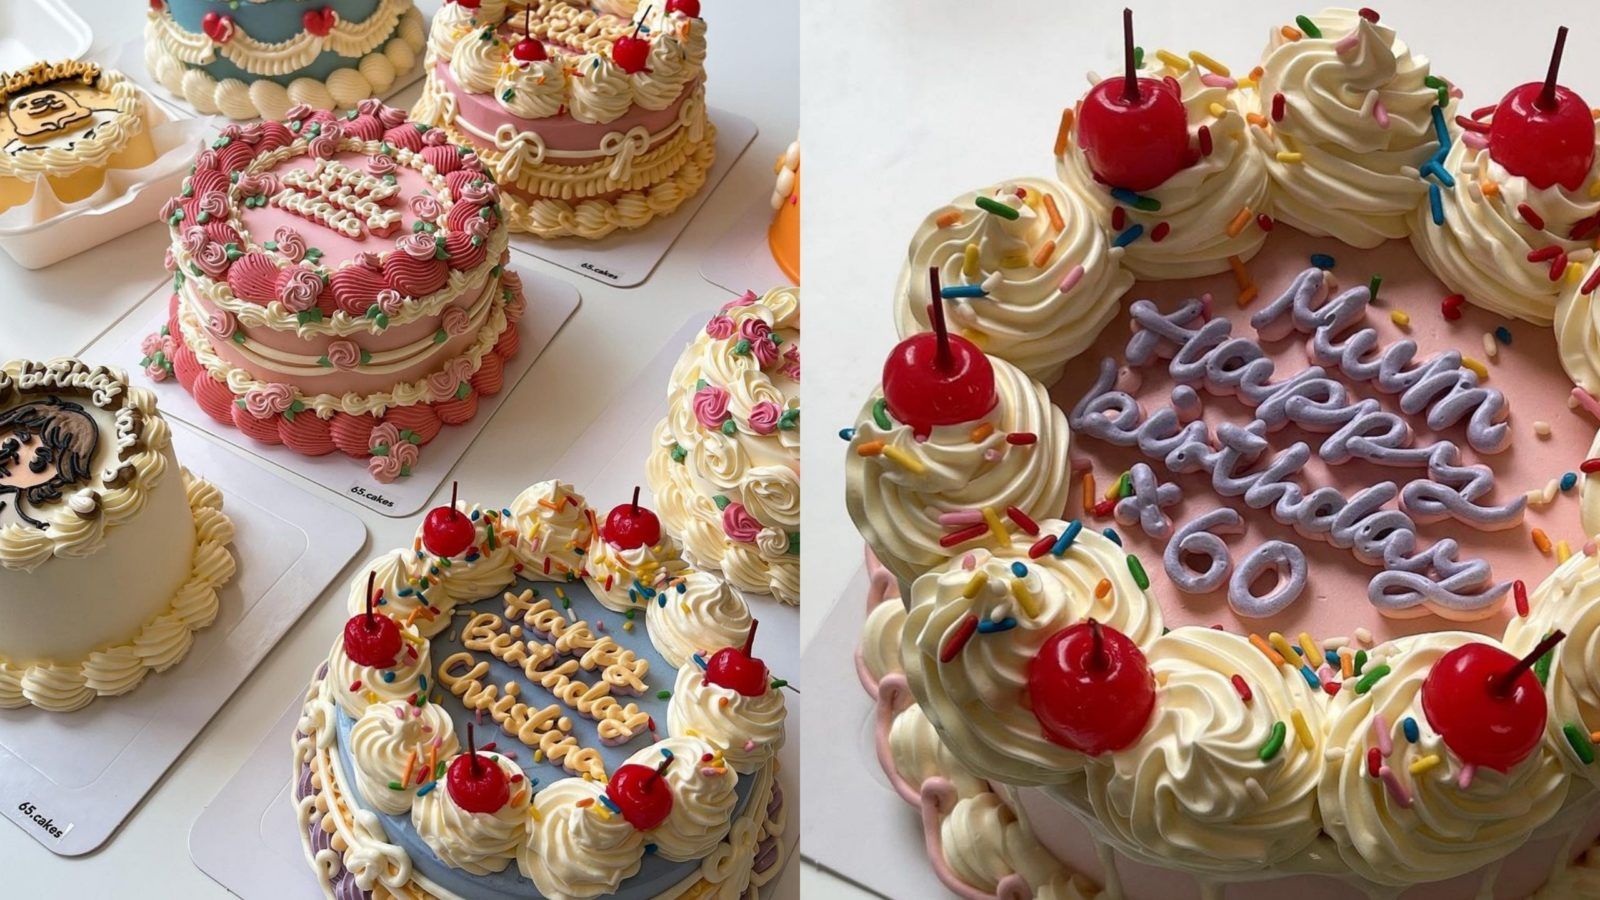 How To Decorate A Lambeth Cake - The Cake Decorating Co. | BlogThe Cake  Decorating Co. | Blog